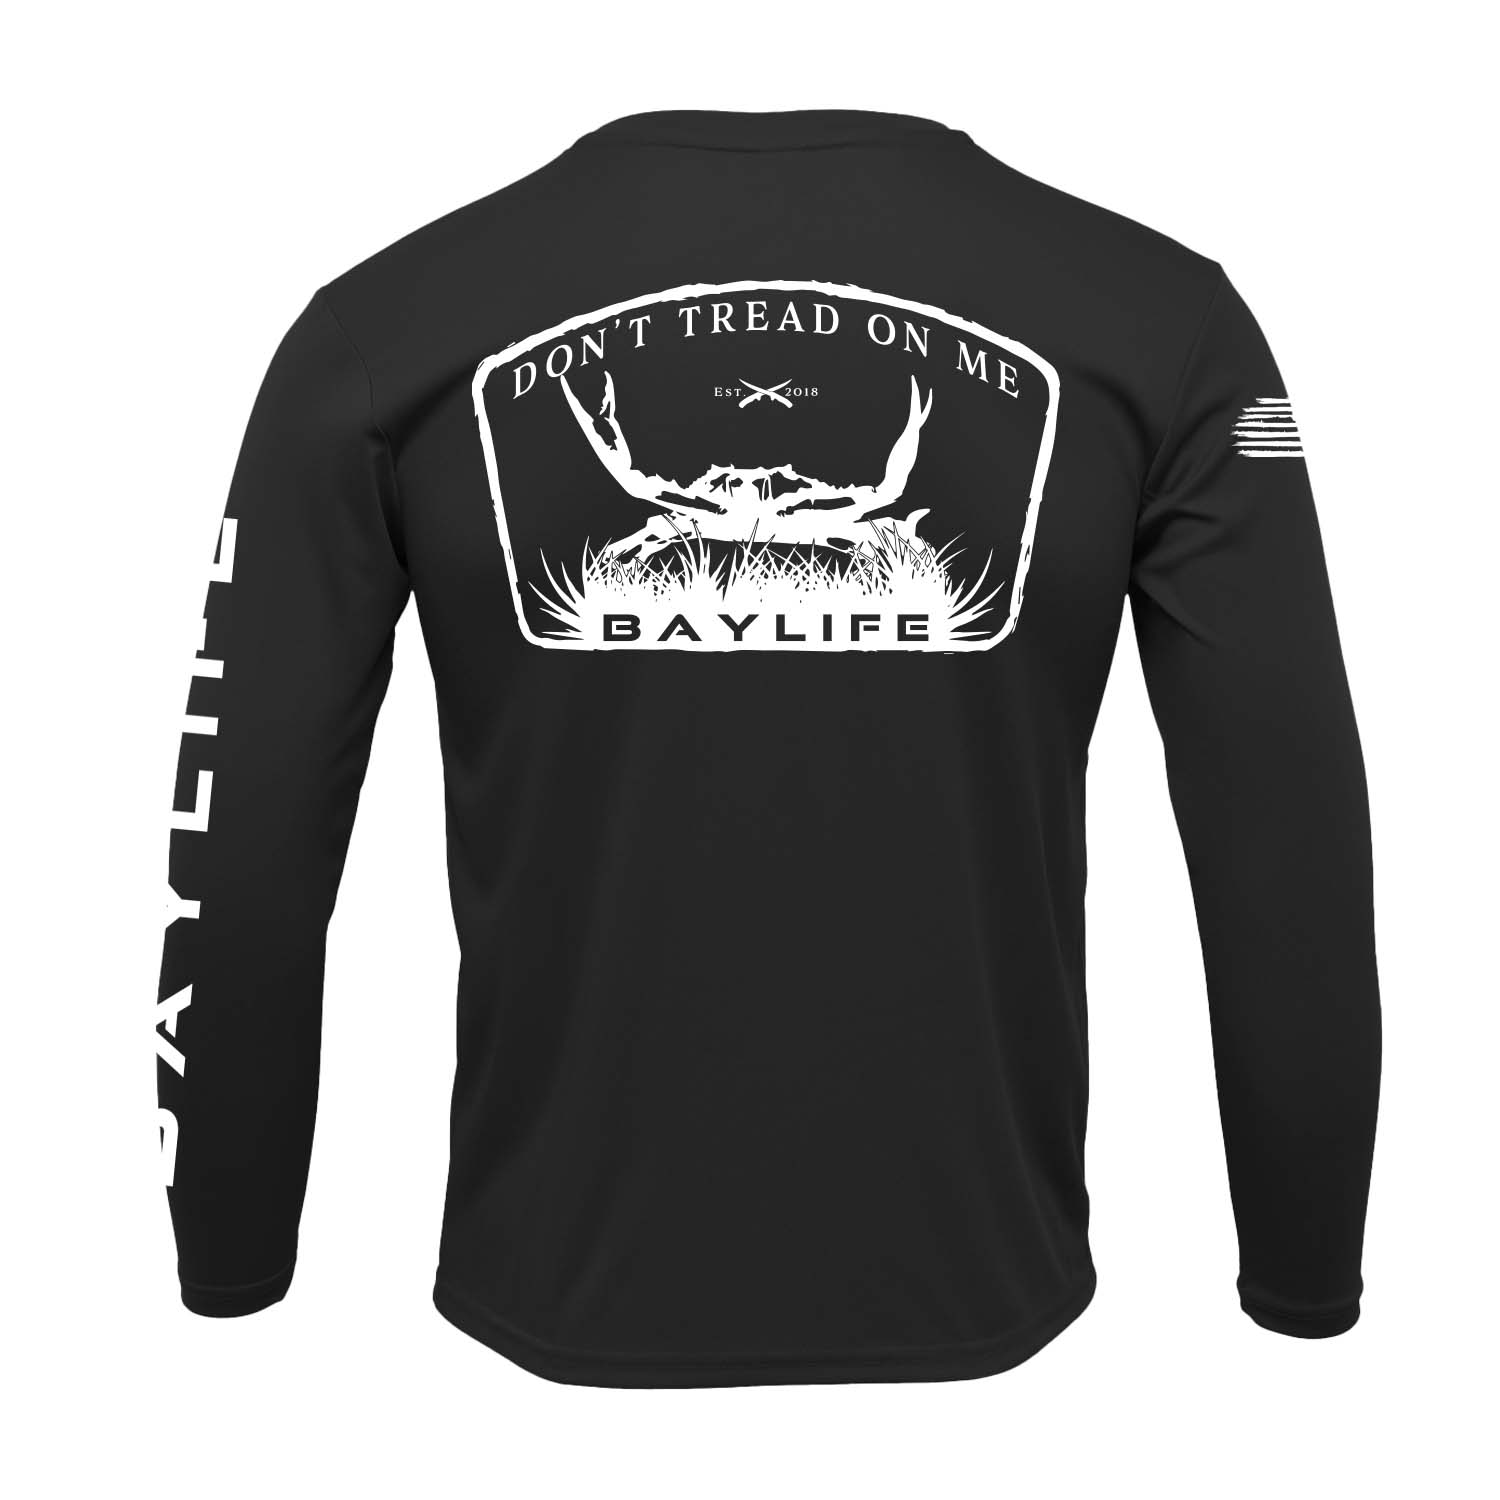 Don't Tread on Me Crab, Performance Long Sleeve